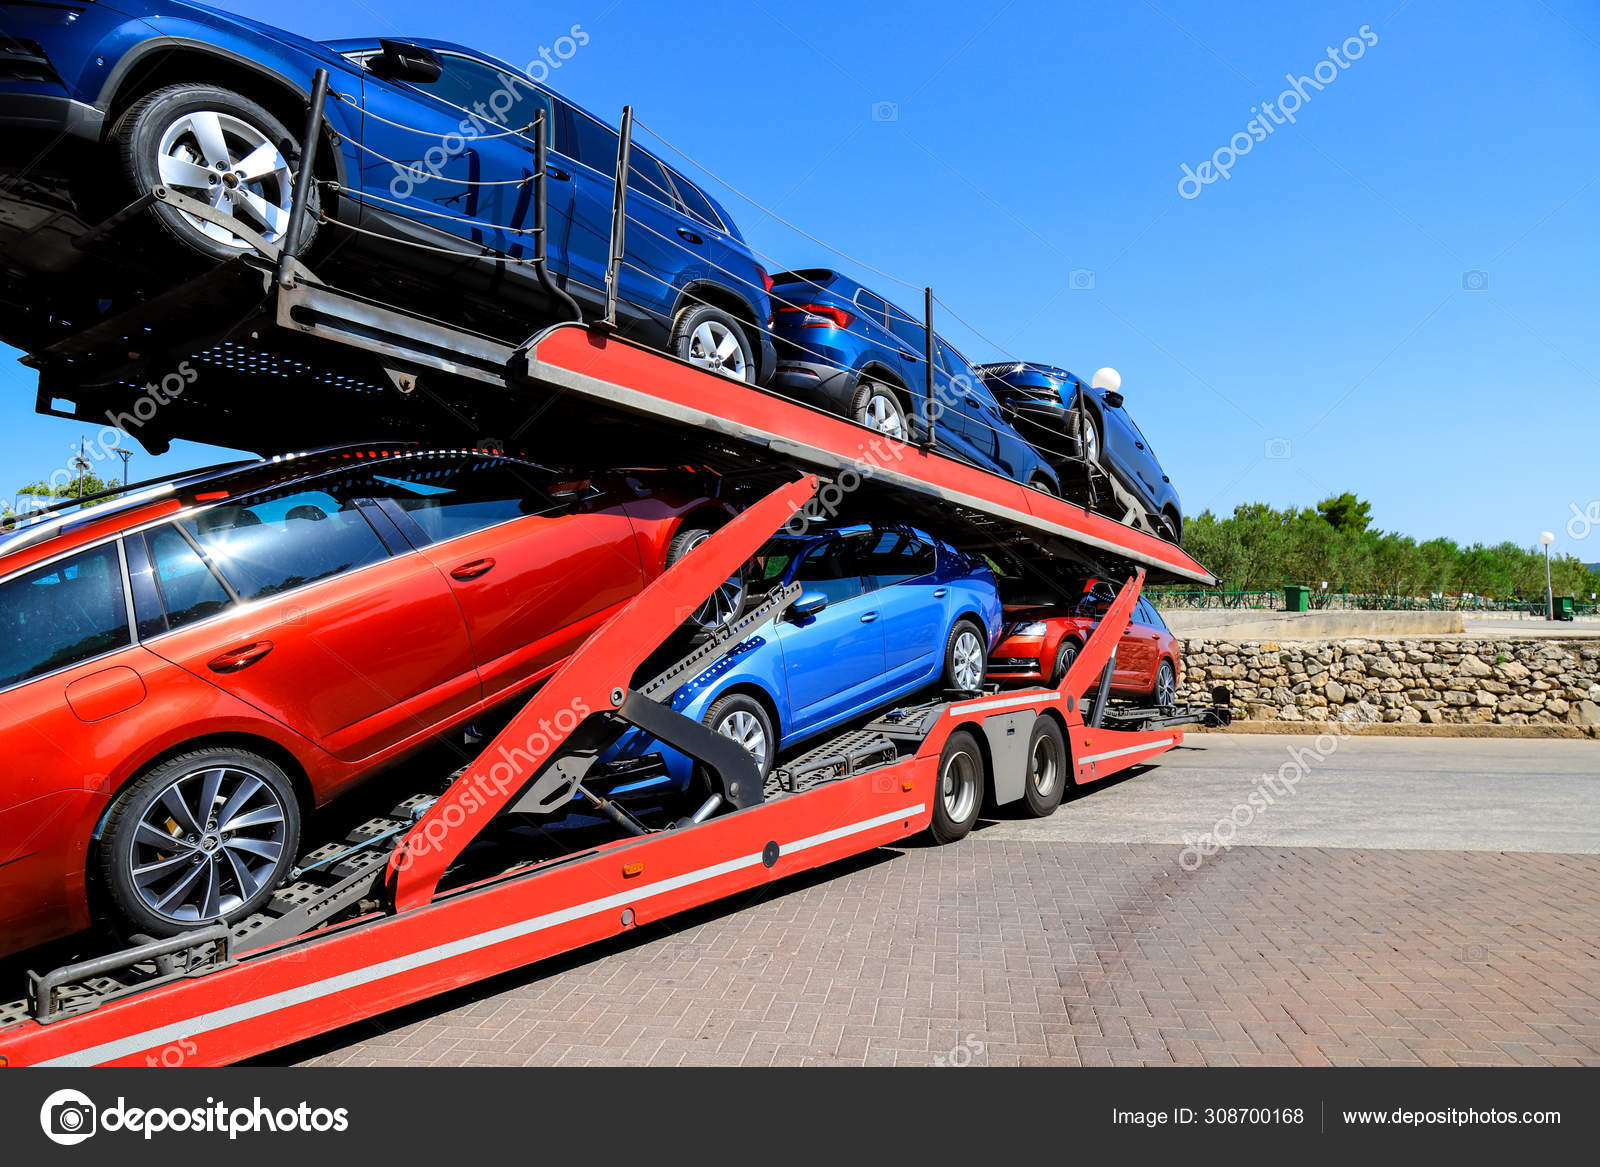 Auto Transporter Carries New Cars Of Blue, Red Colors From, 60% OFF